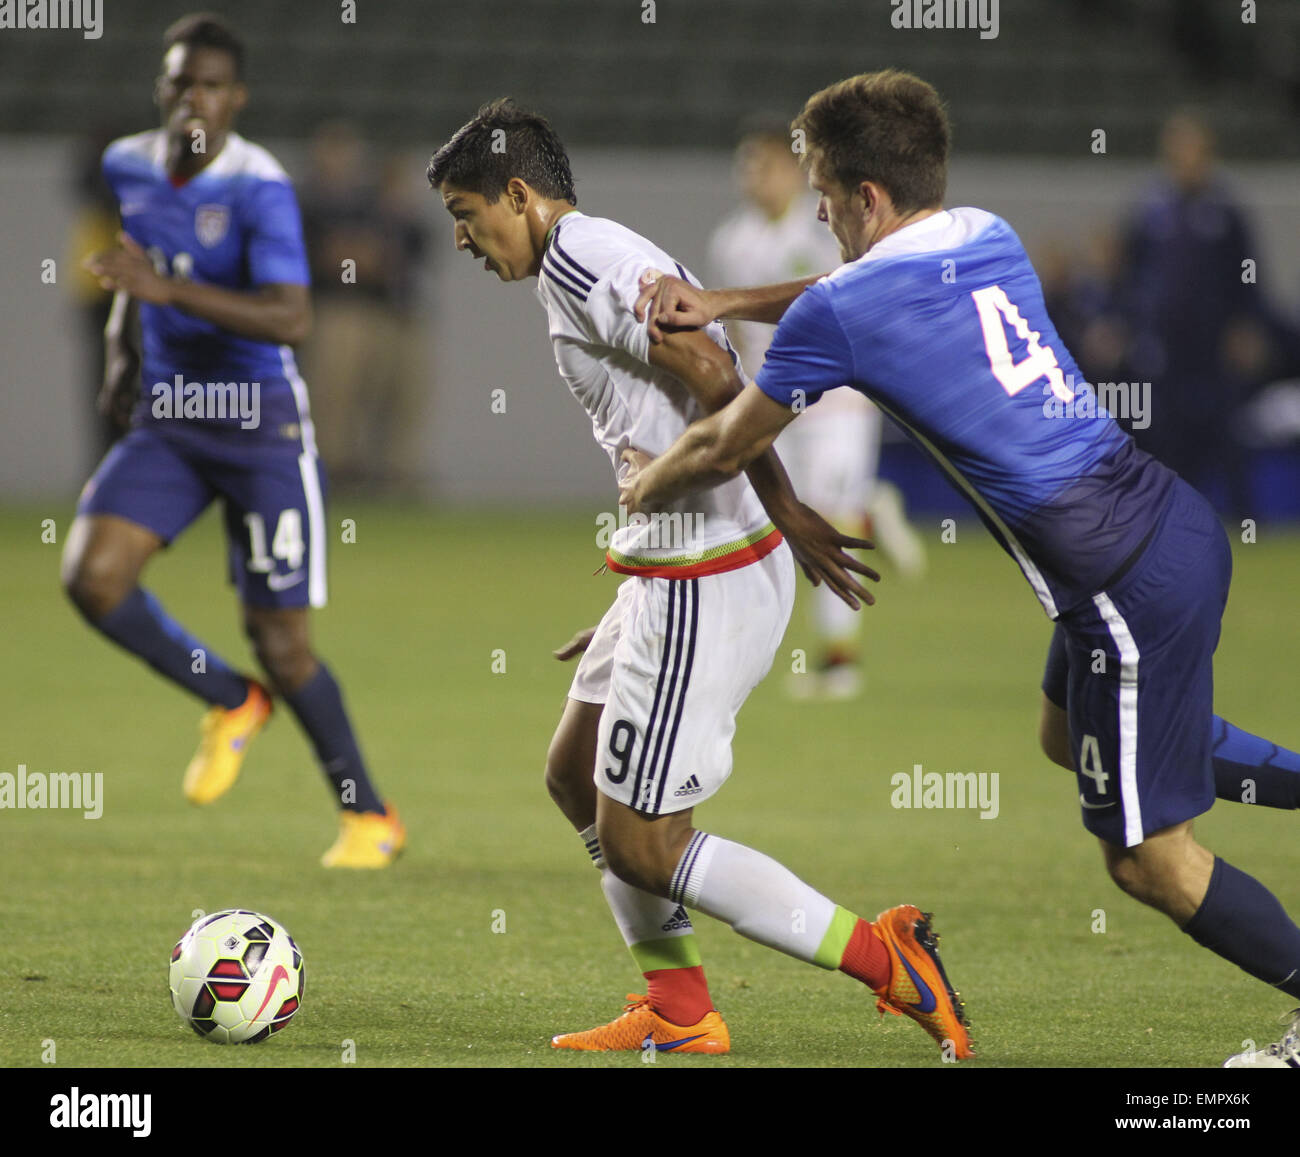 Los Angeles, California, USA. 22nd Apr, 2015. United States' Shane O'Neill #4 actions against Mexico's çngel Zaldivar #9 during a men's national team international friendly match, April 22, 2015, at StubHub Center in Carson, California. United States won 3-0. Credit:  Ringo Chiu/ZUMA Wire/Alamy Live News Stock Photo